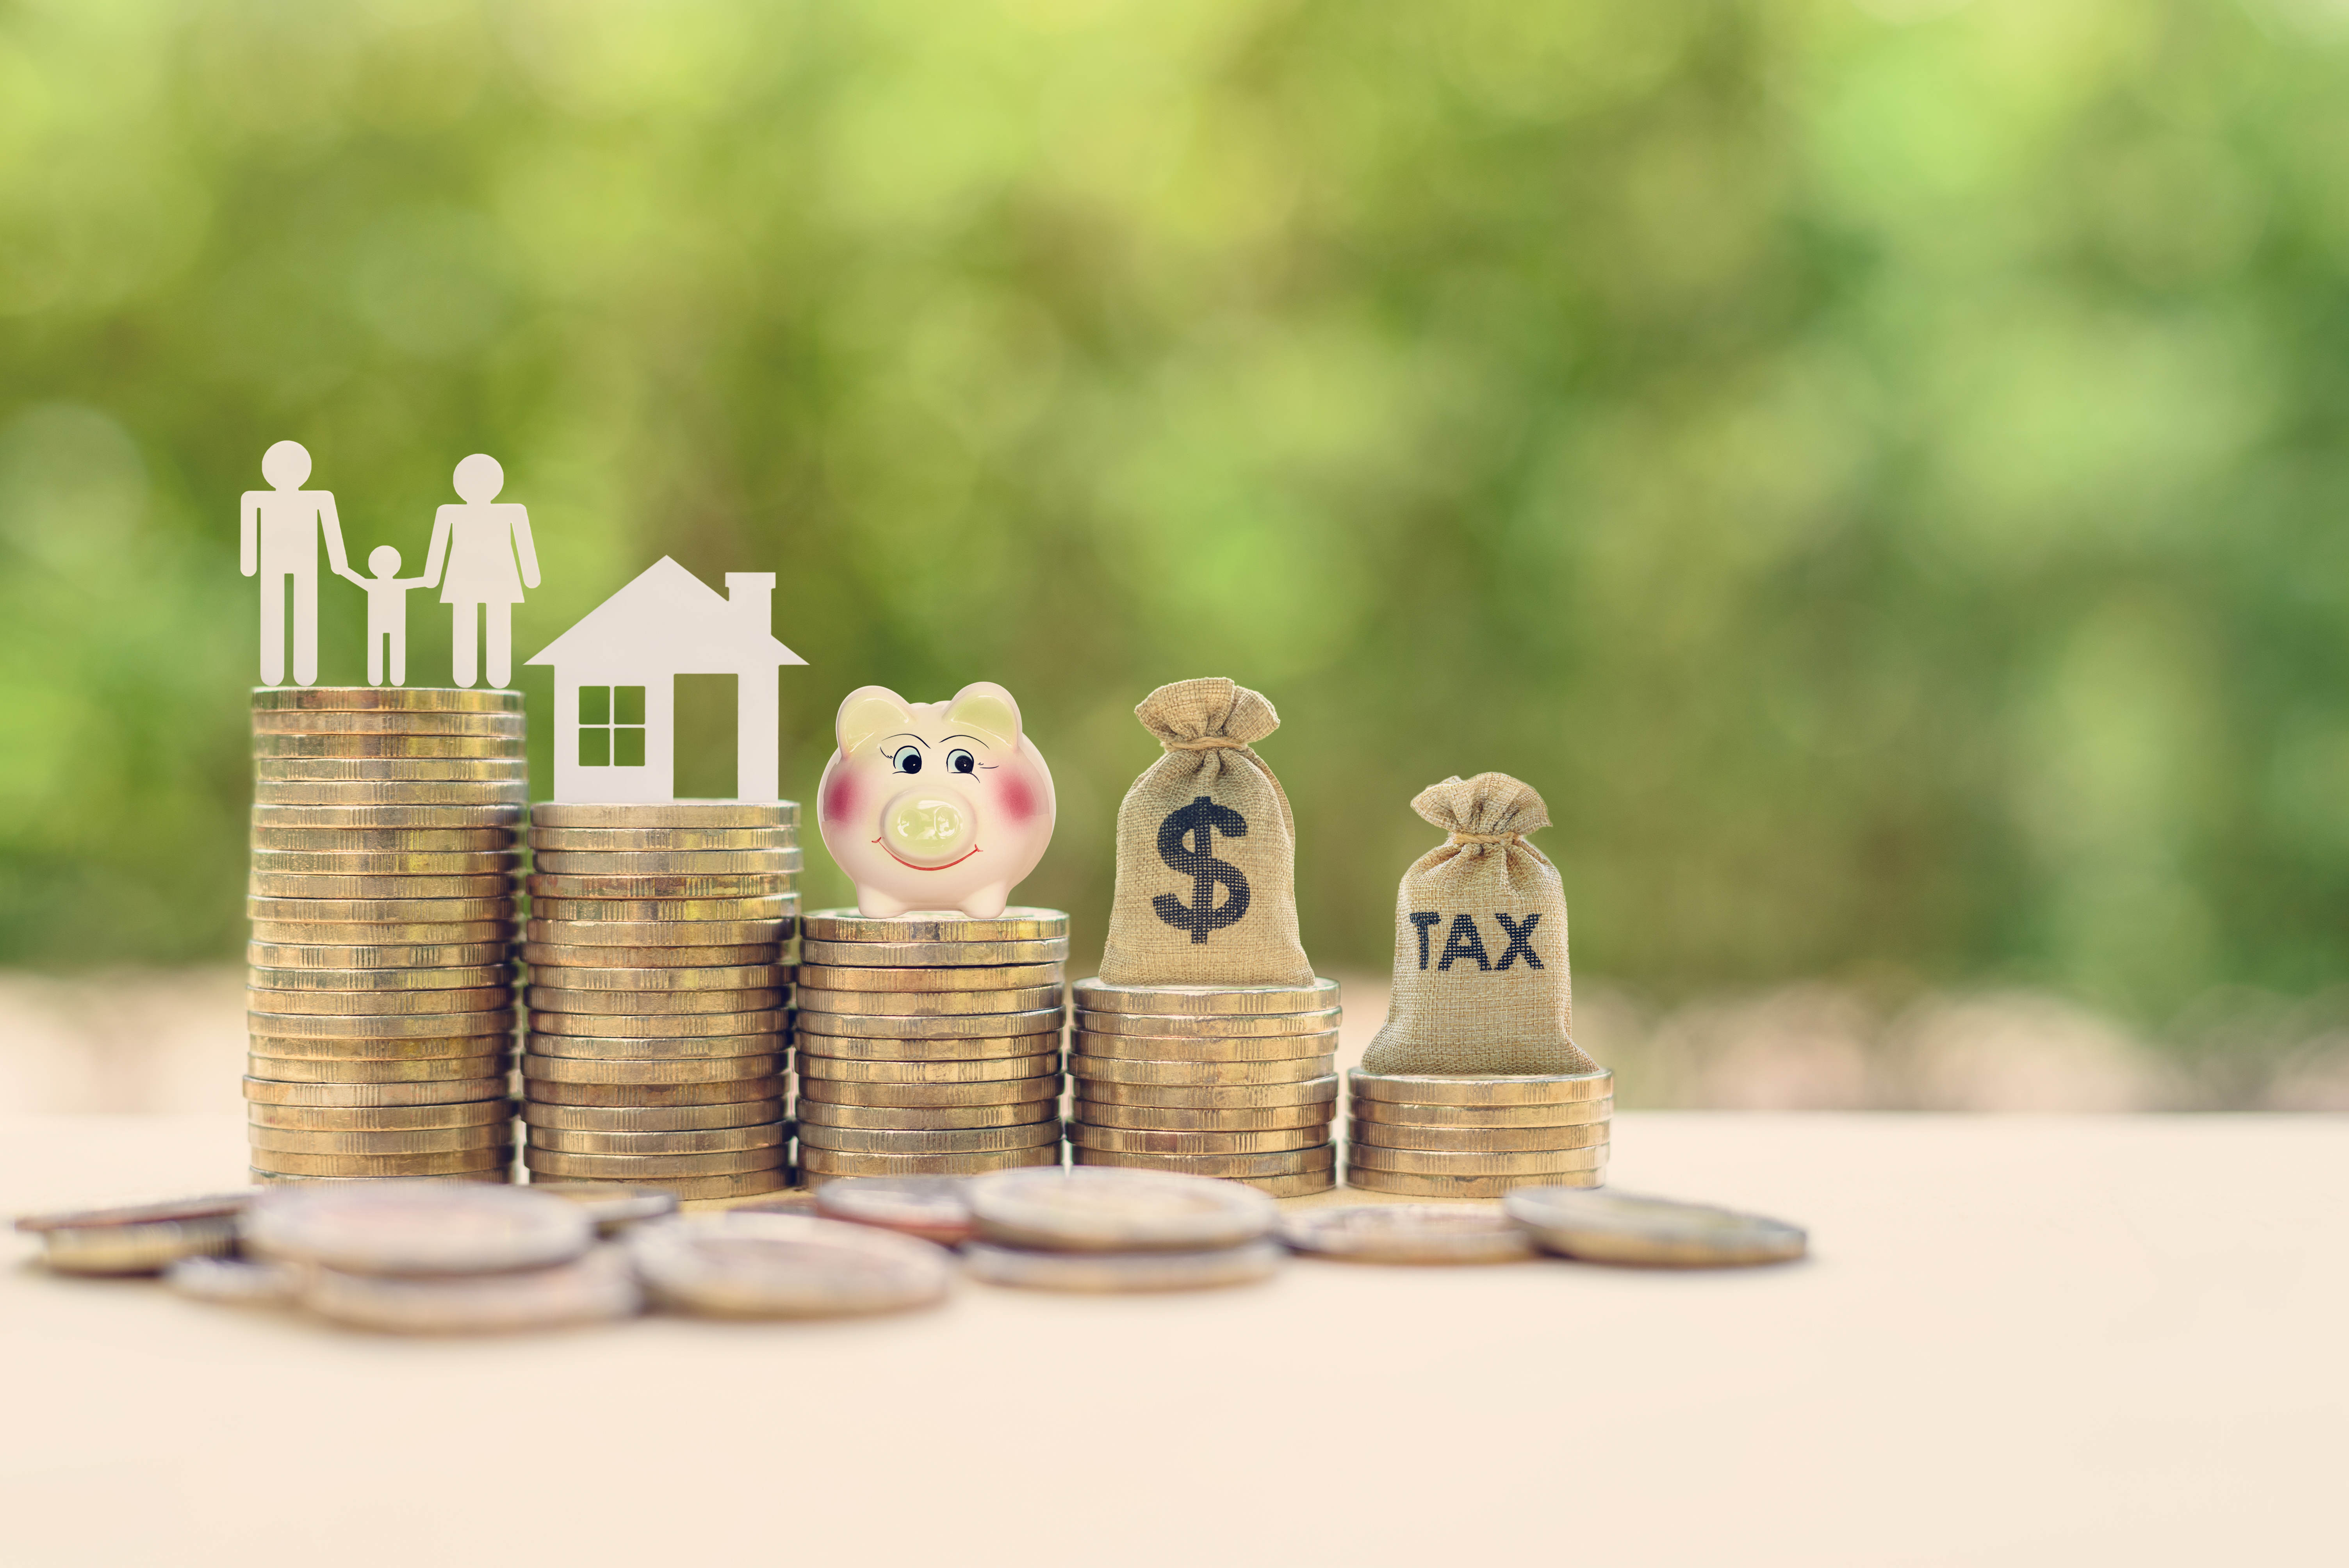 An image of a family, a house, a piggy bank, and a bag of money stacked on top of a coin to represent a real estate plan.